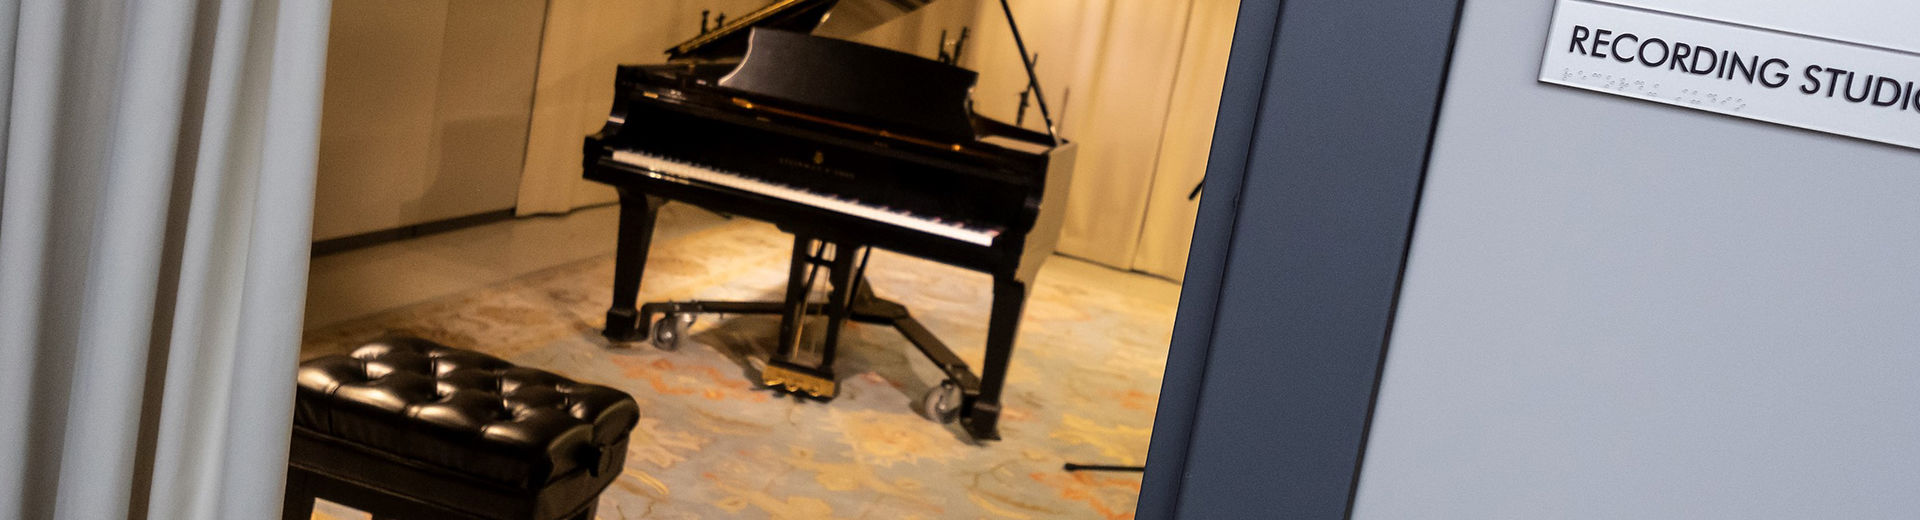 Practice room in music school with a grand piano and blue patterned carpet